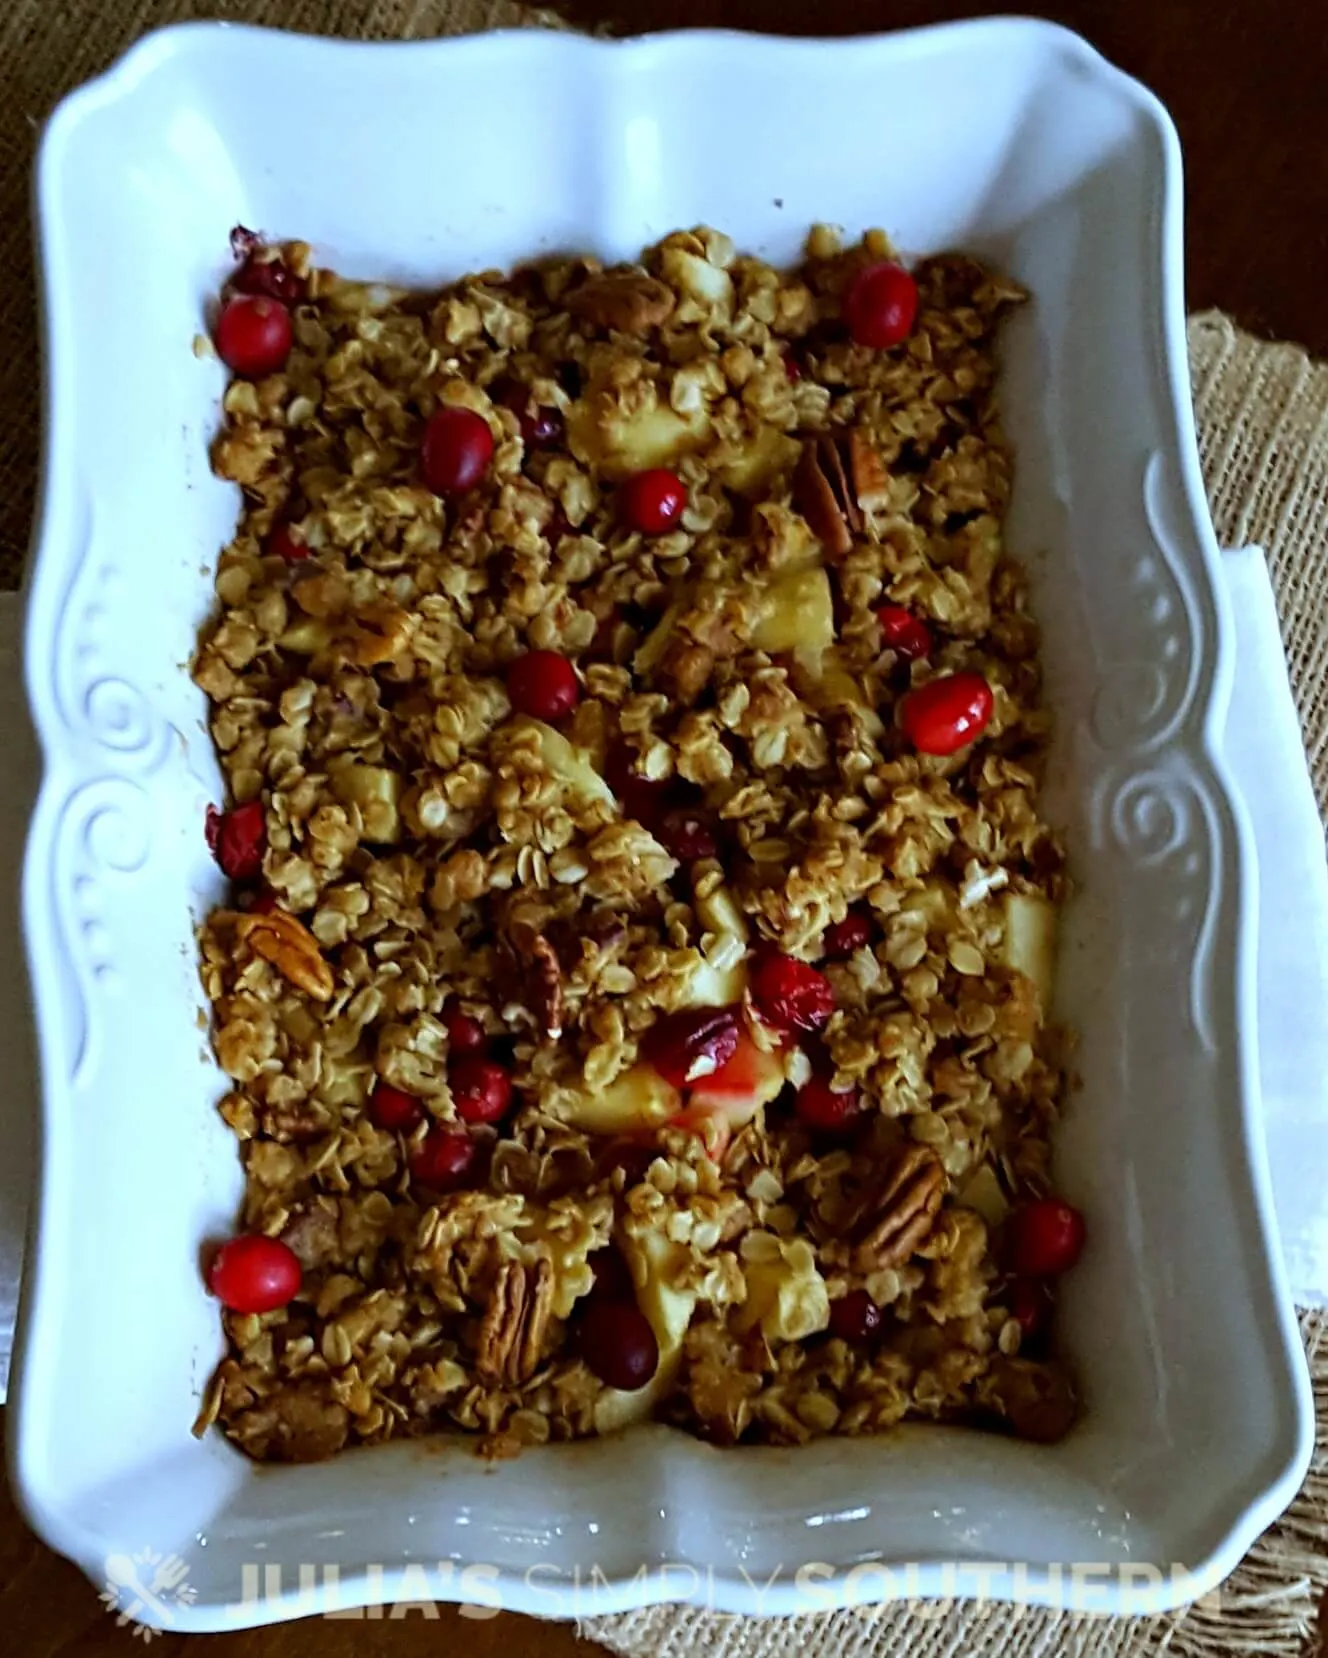 White baking dish with apple cranberry cobbler